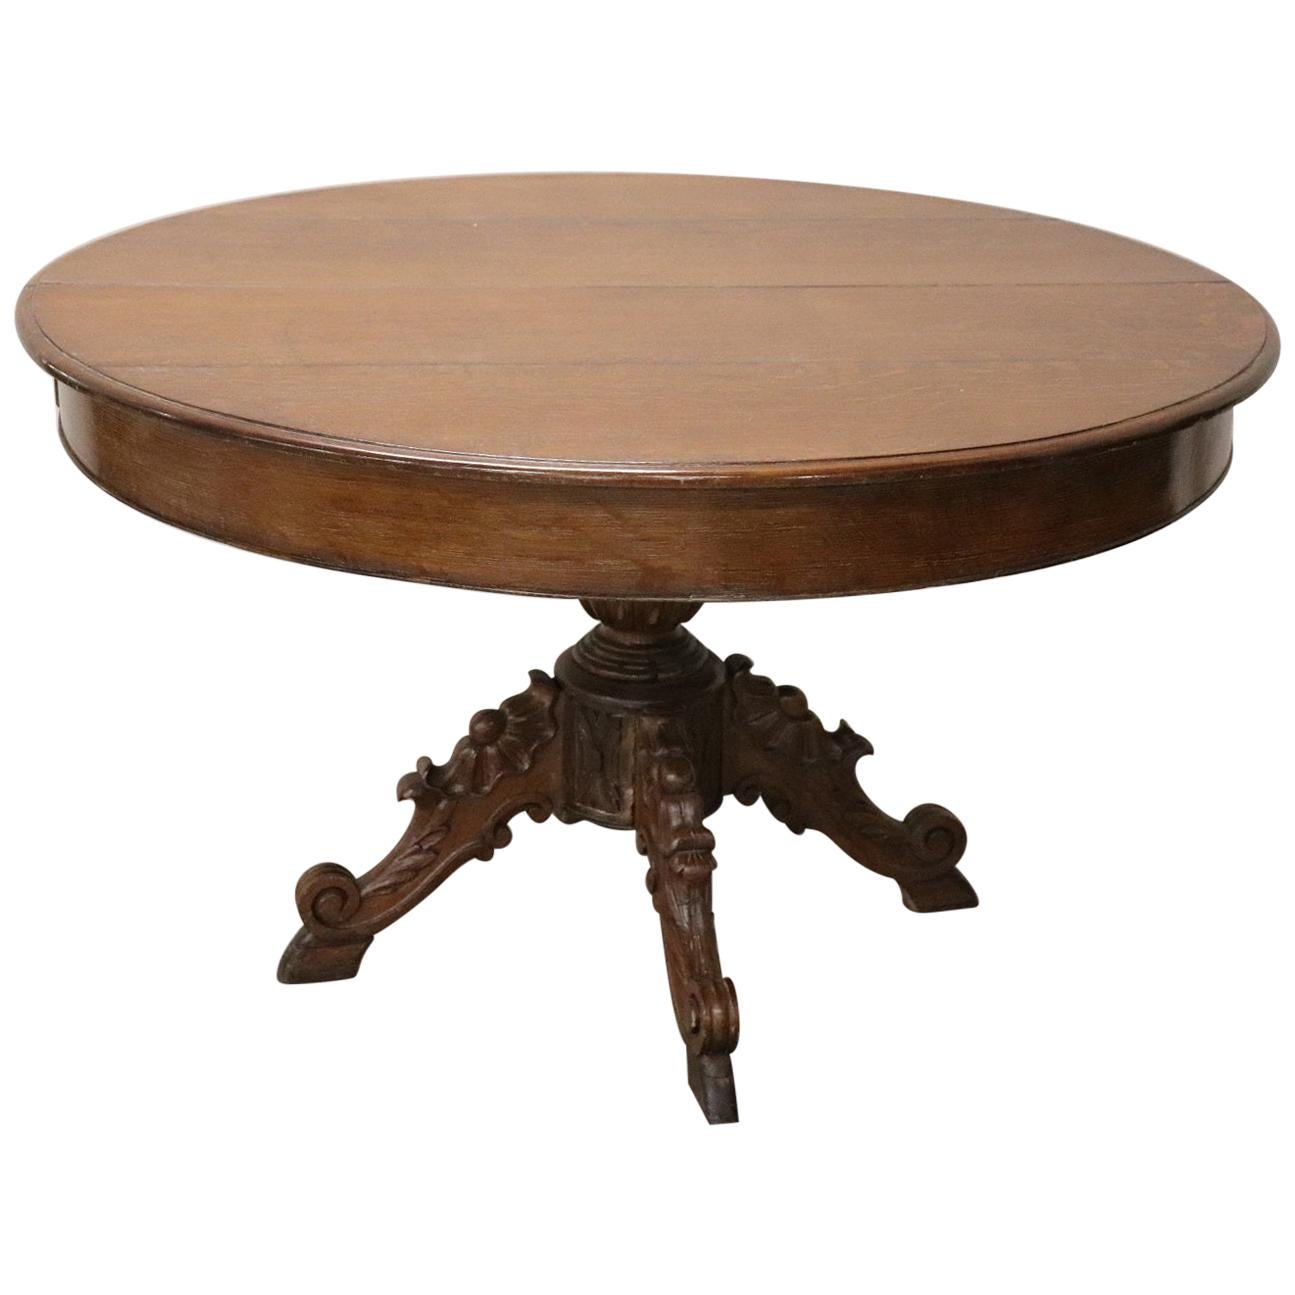 19th Century Italian Carved Oak Round Extendable Antique Dining Room Table